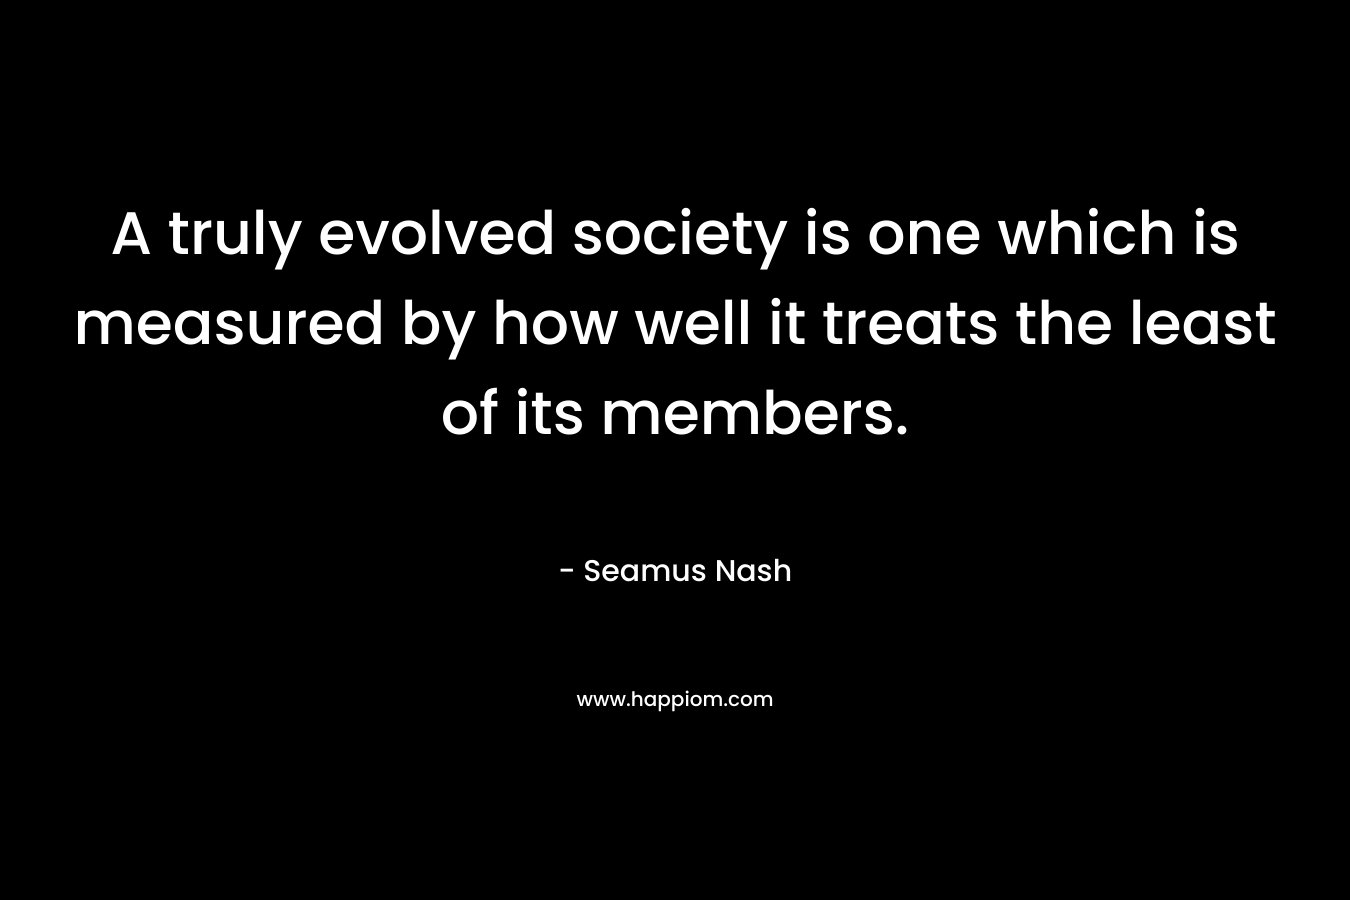 A truly evolved society is one which is measured by how well it treats the least of its members.